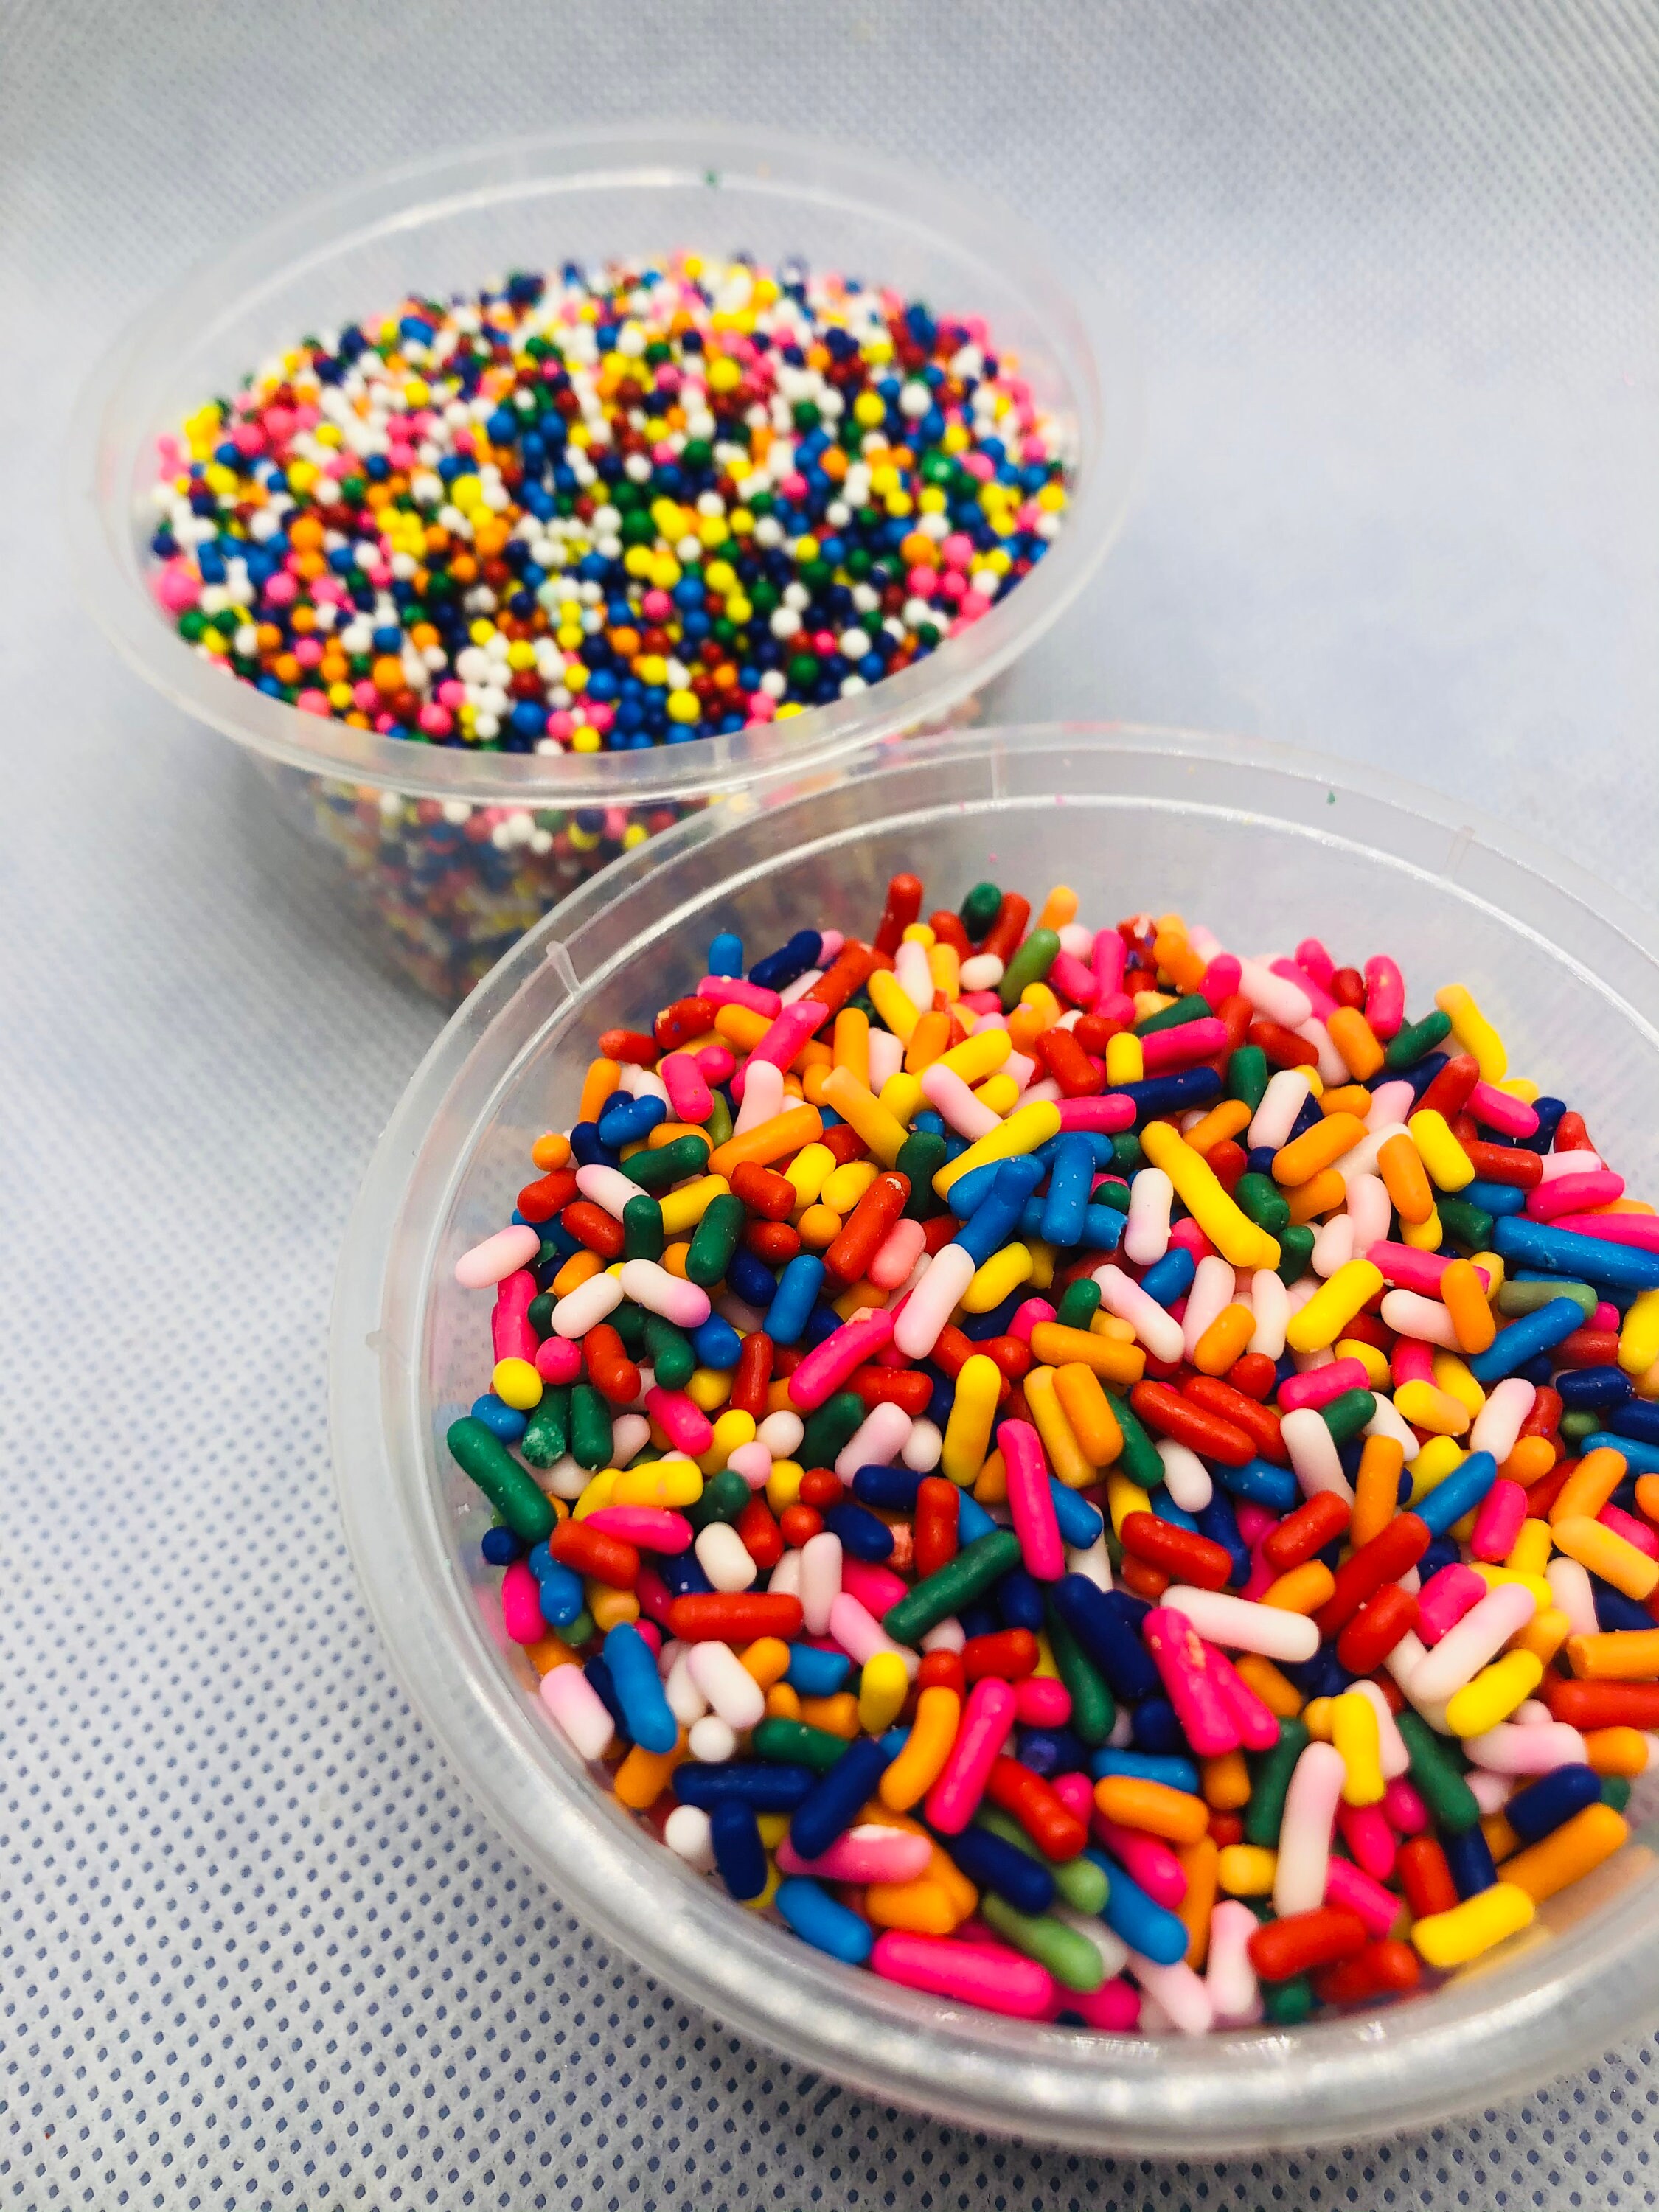 Like this packaging-could use for wax sprinkles